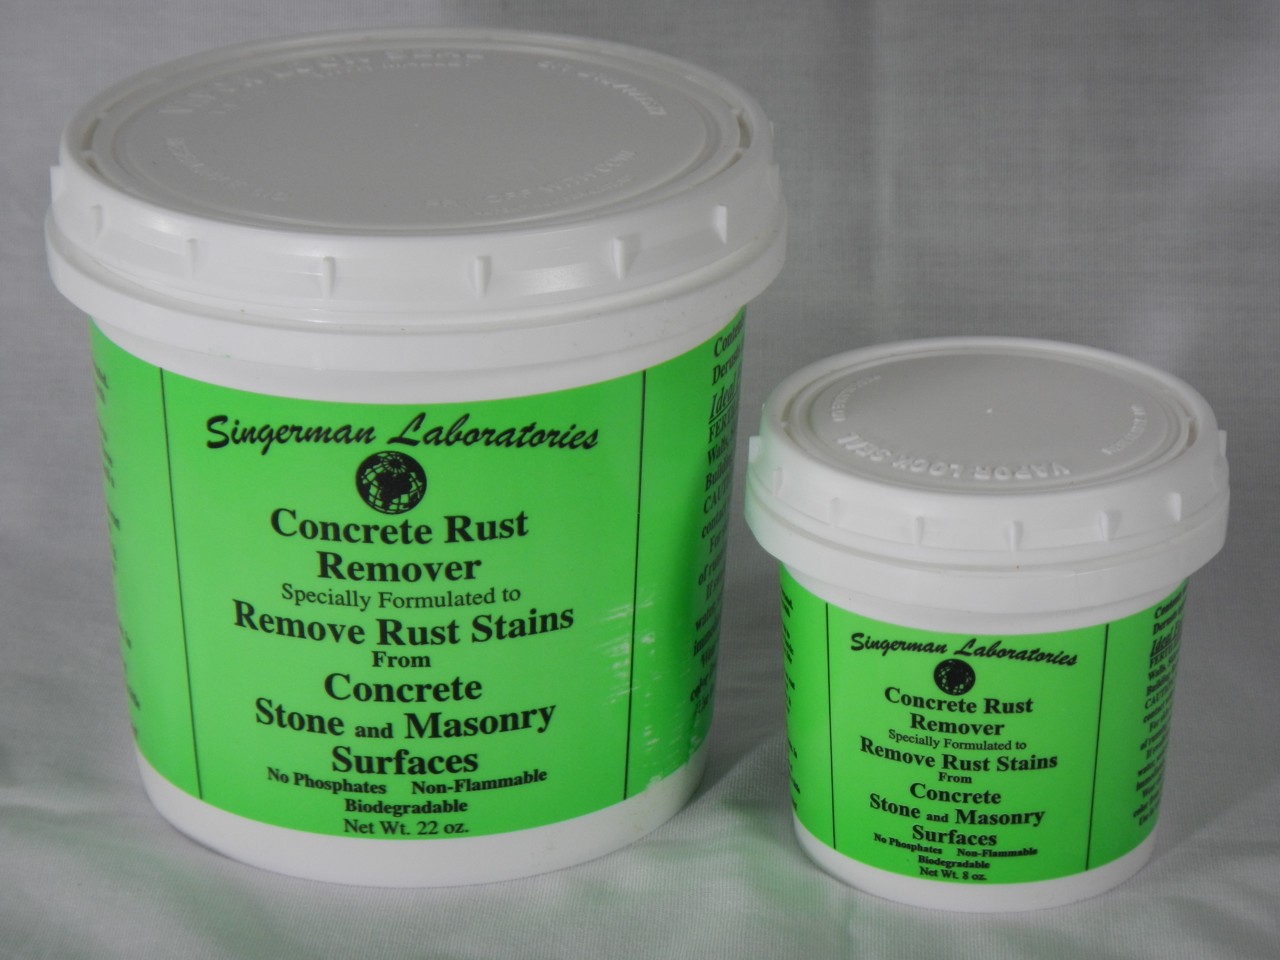 I am also interested in the "Singerman Laboratories Rust Remover for Concrete" for cleaning a vertical concrete pan